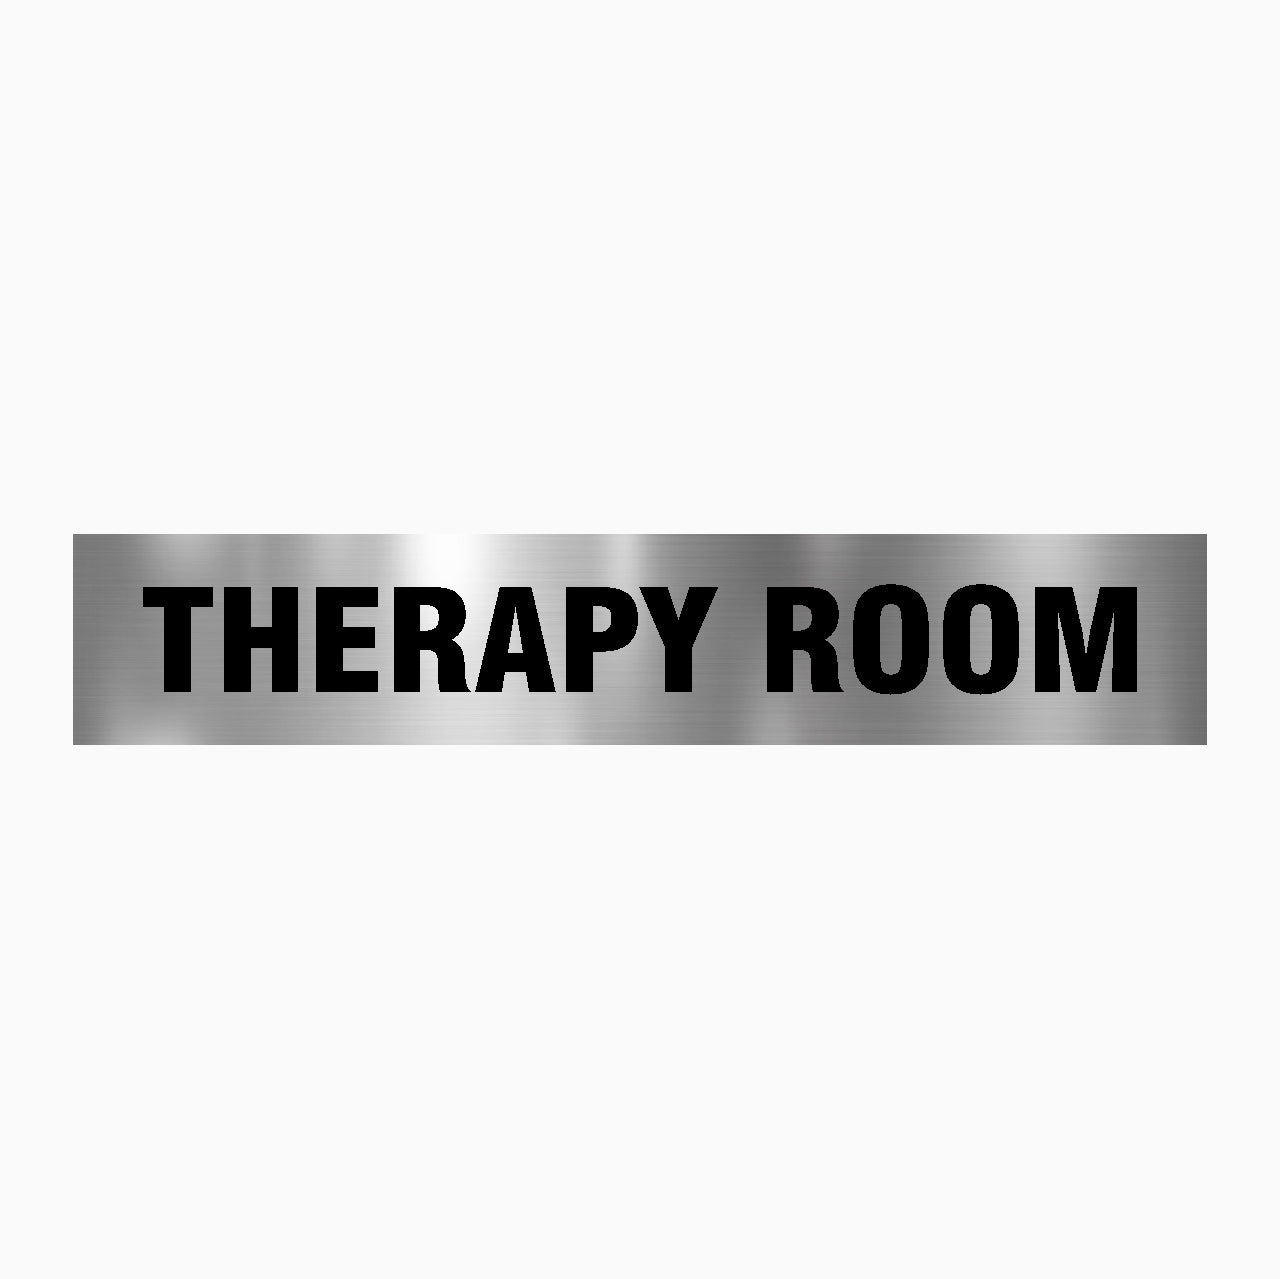 THERAPY ROOM SIGN